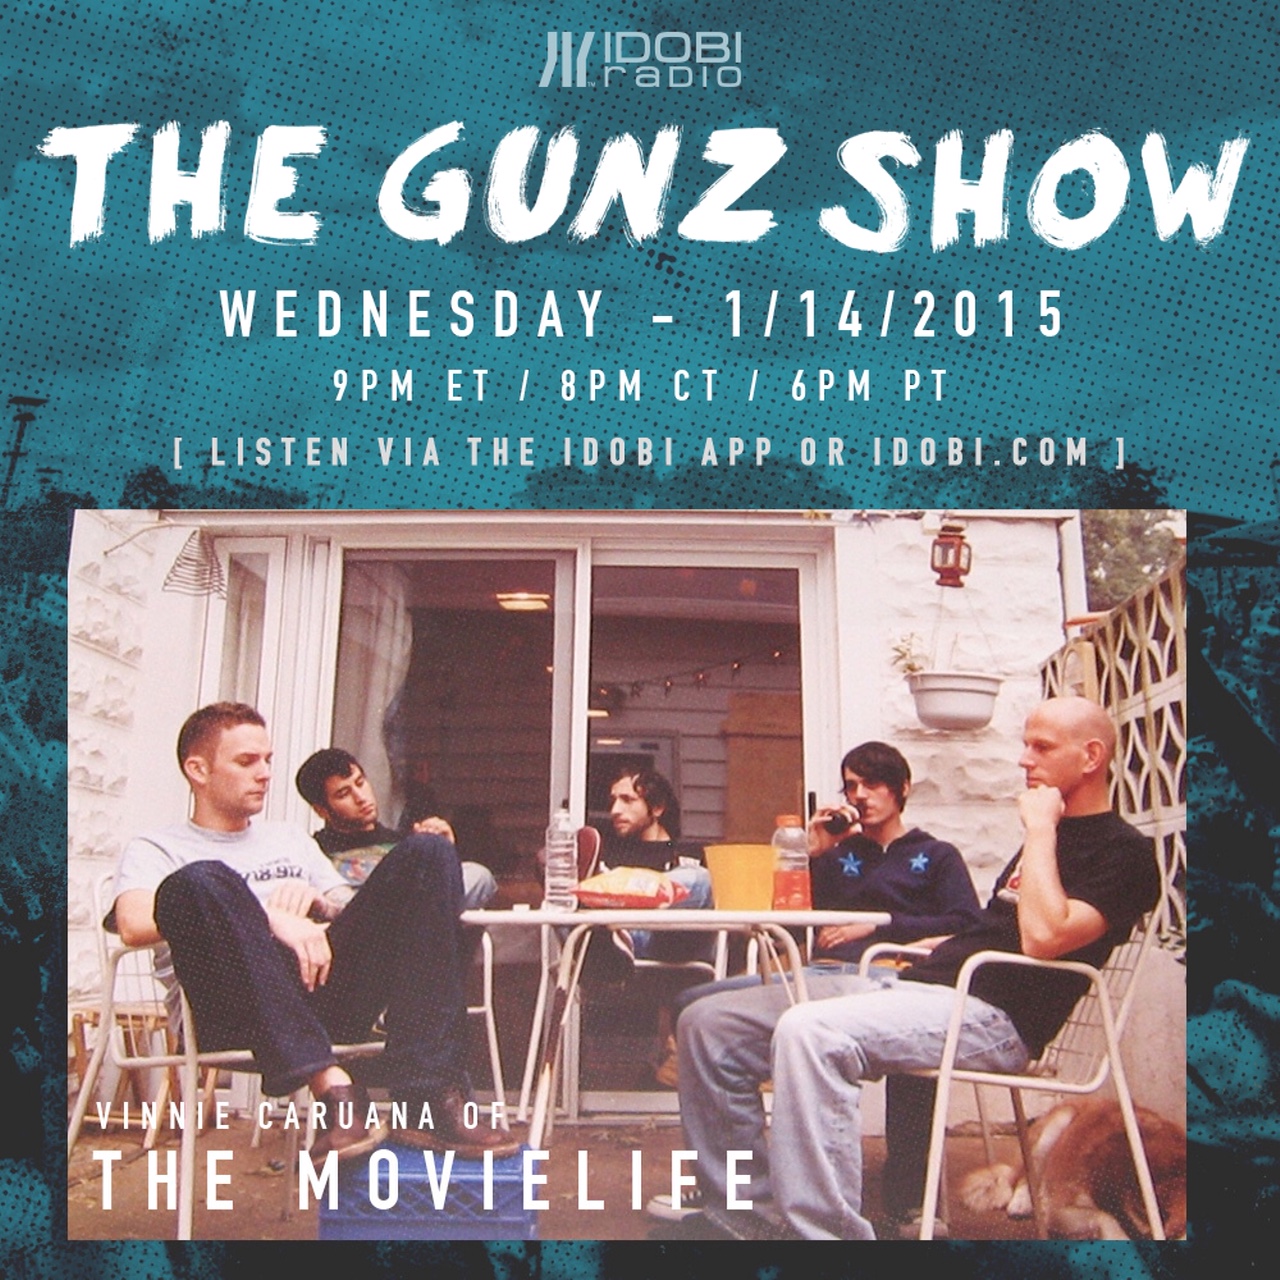 The Gunz Show - January 14th, 2015